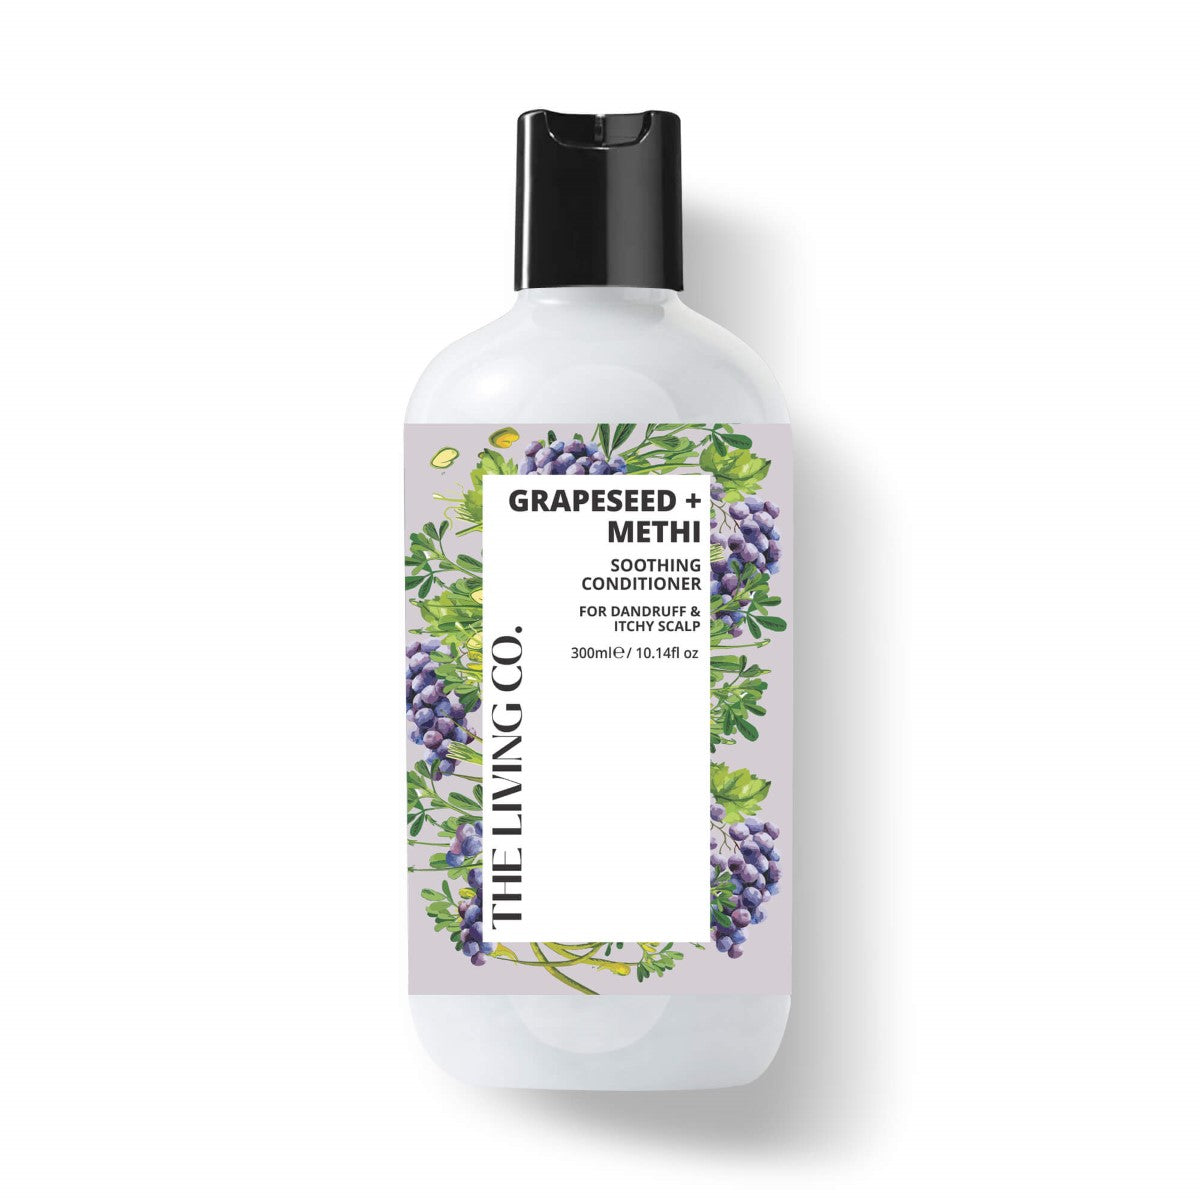 Soothing Conditioner With Grapeseed + Methi